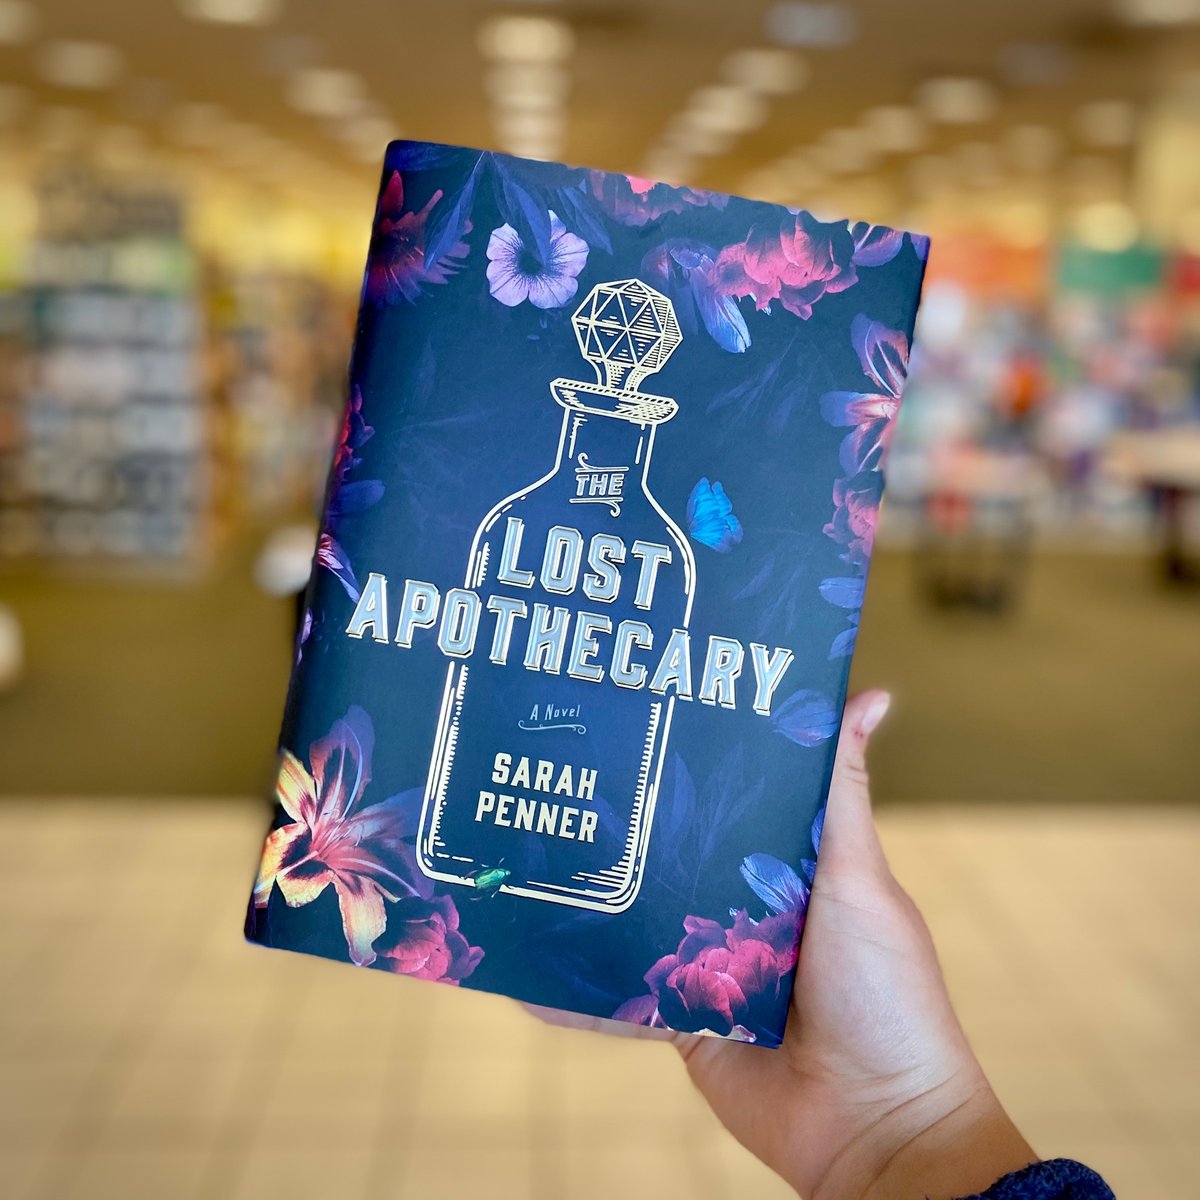 The cover of The Lost Apothecary by Sarah Penner gives us major dark Wonderland vibes 😍 This utterly unique mix of historical fiction and mystery thriller will have you reading late into the night! Cover design by Elita Sidiropoulou
#BNTemecula #142BN #BNDiscoverPick